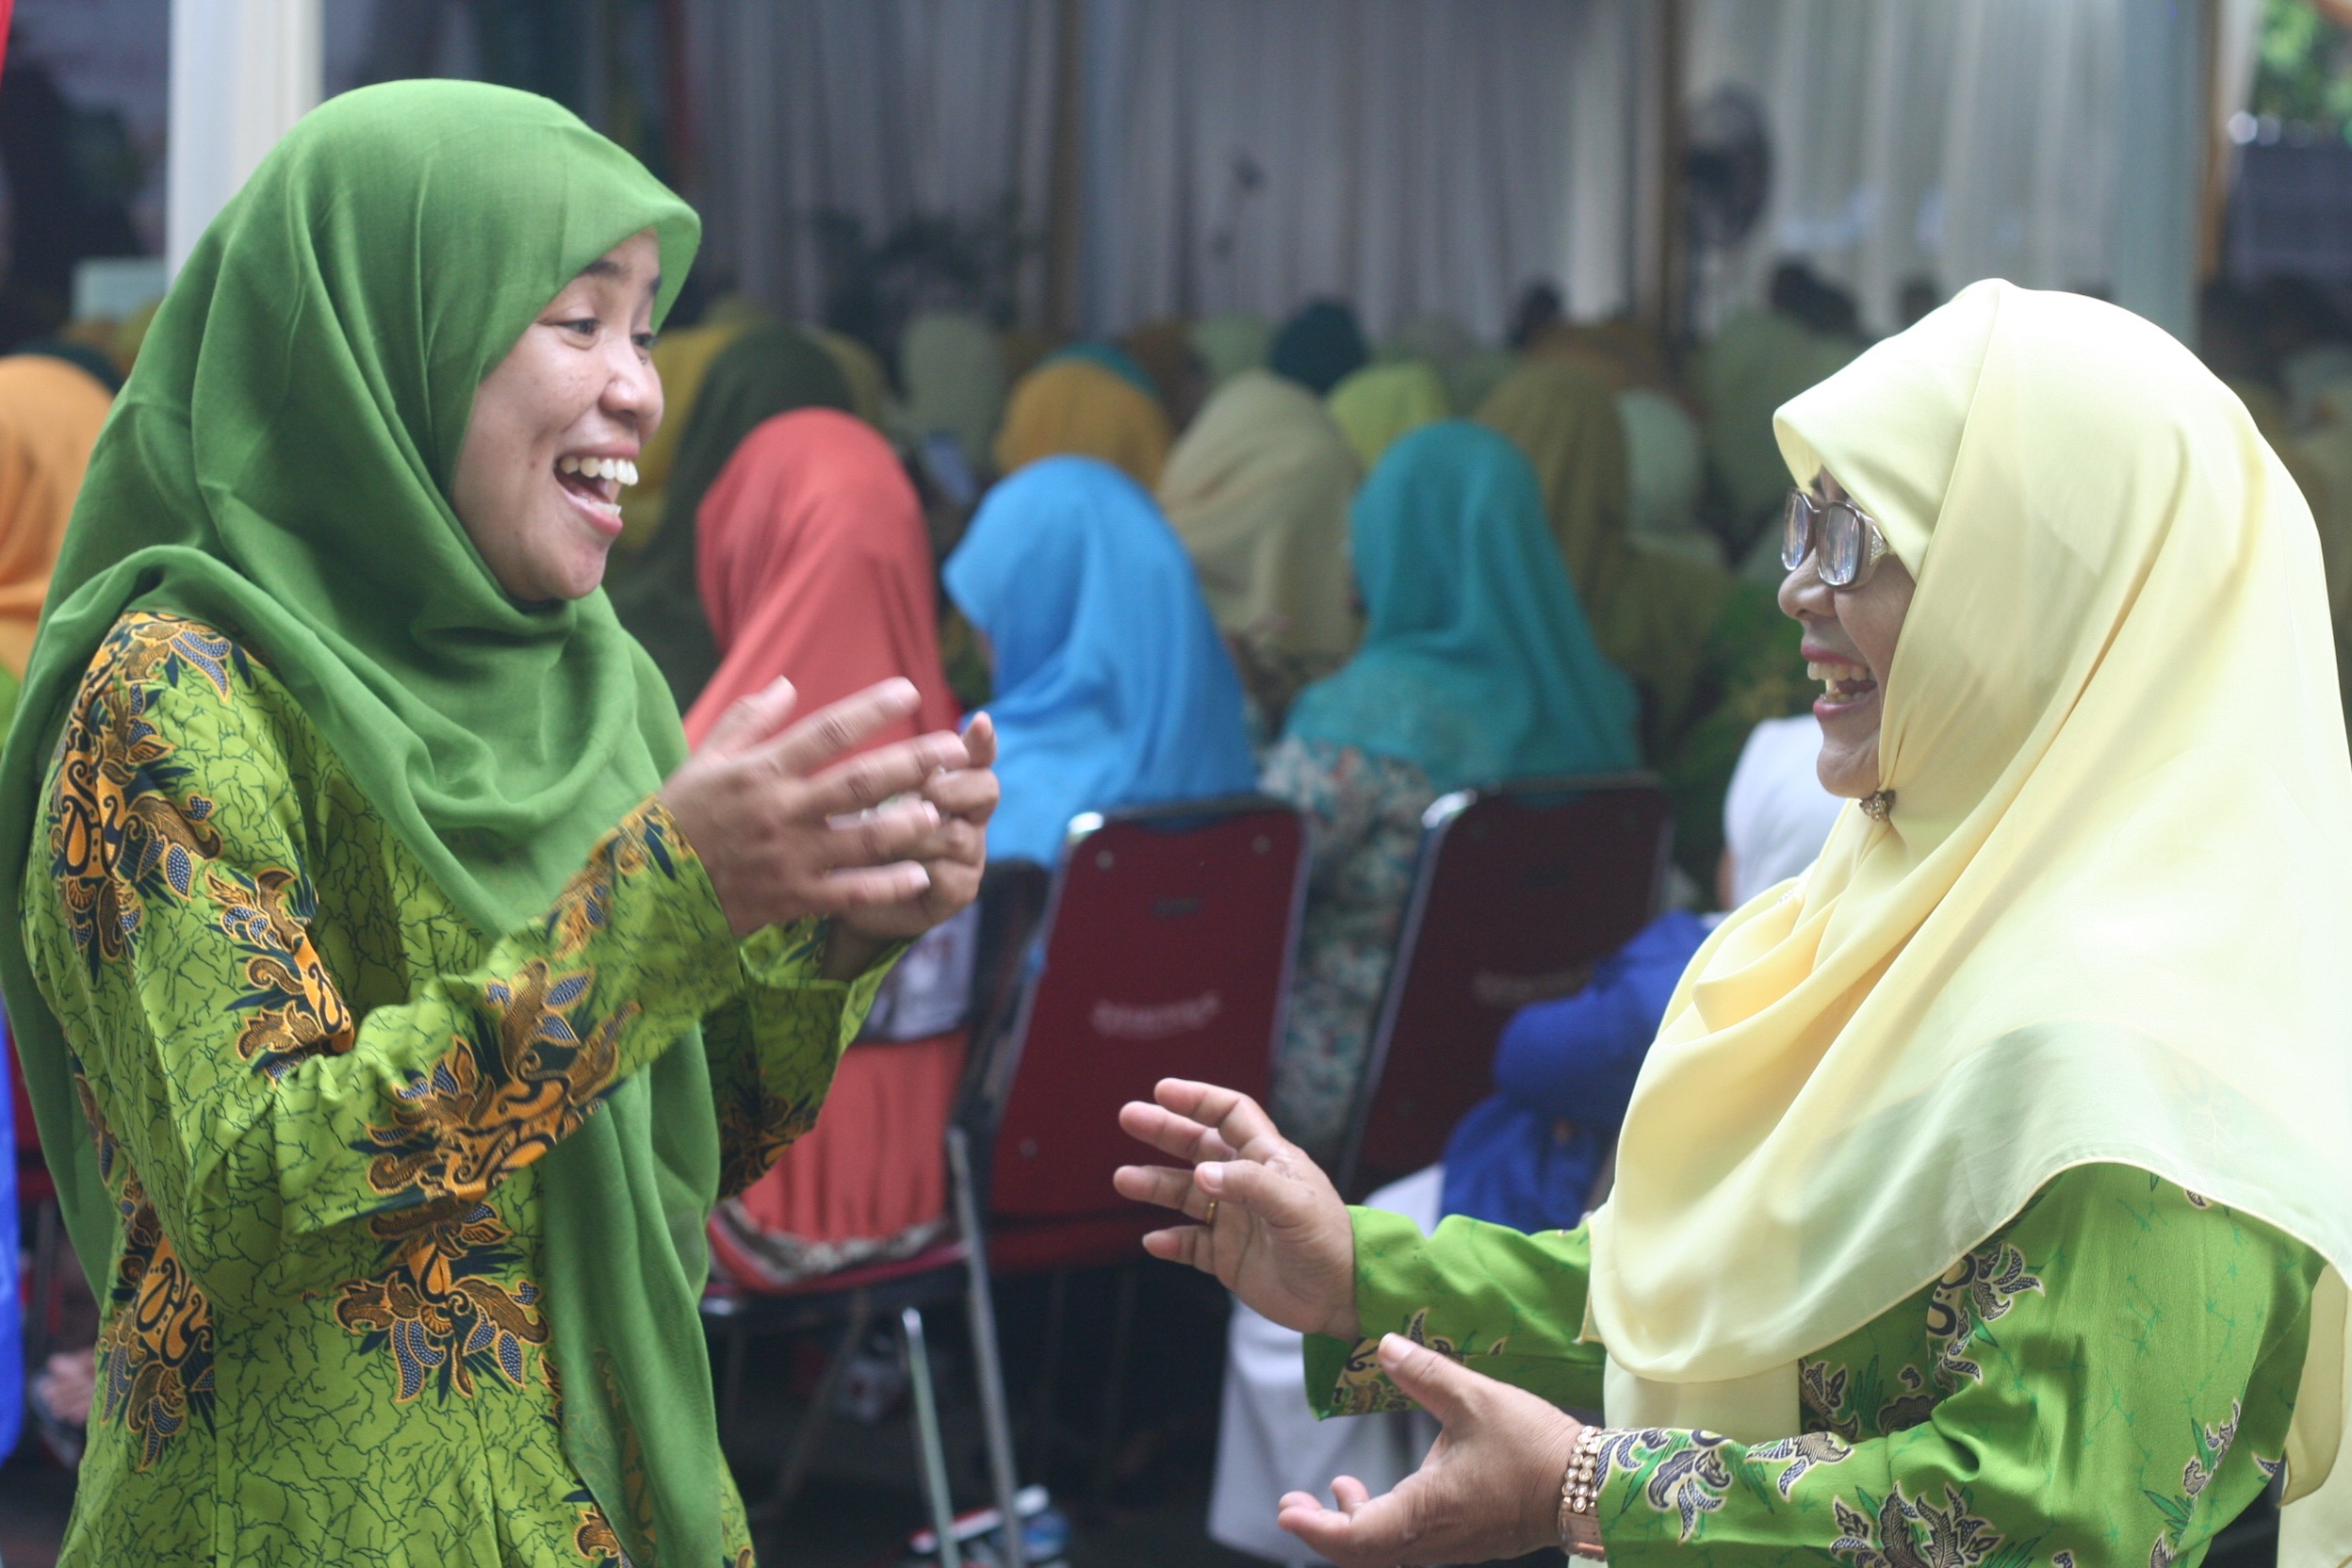 Acha (left) catches up with Ema, an Aisyiyah volunteer.